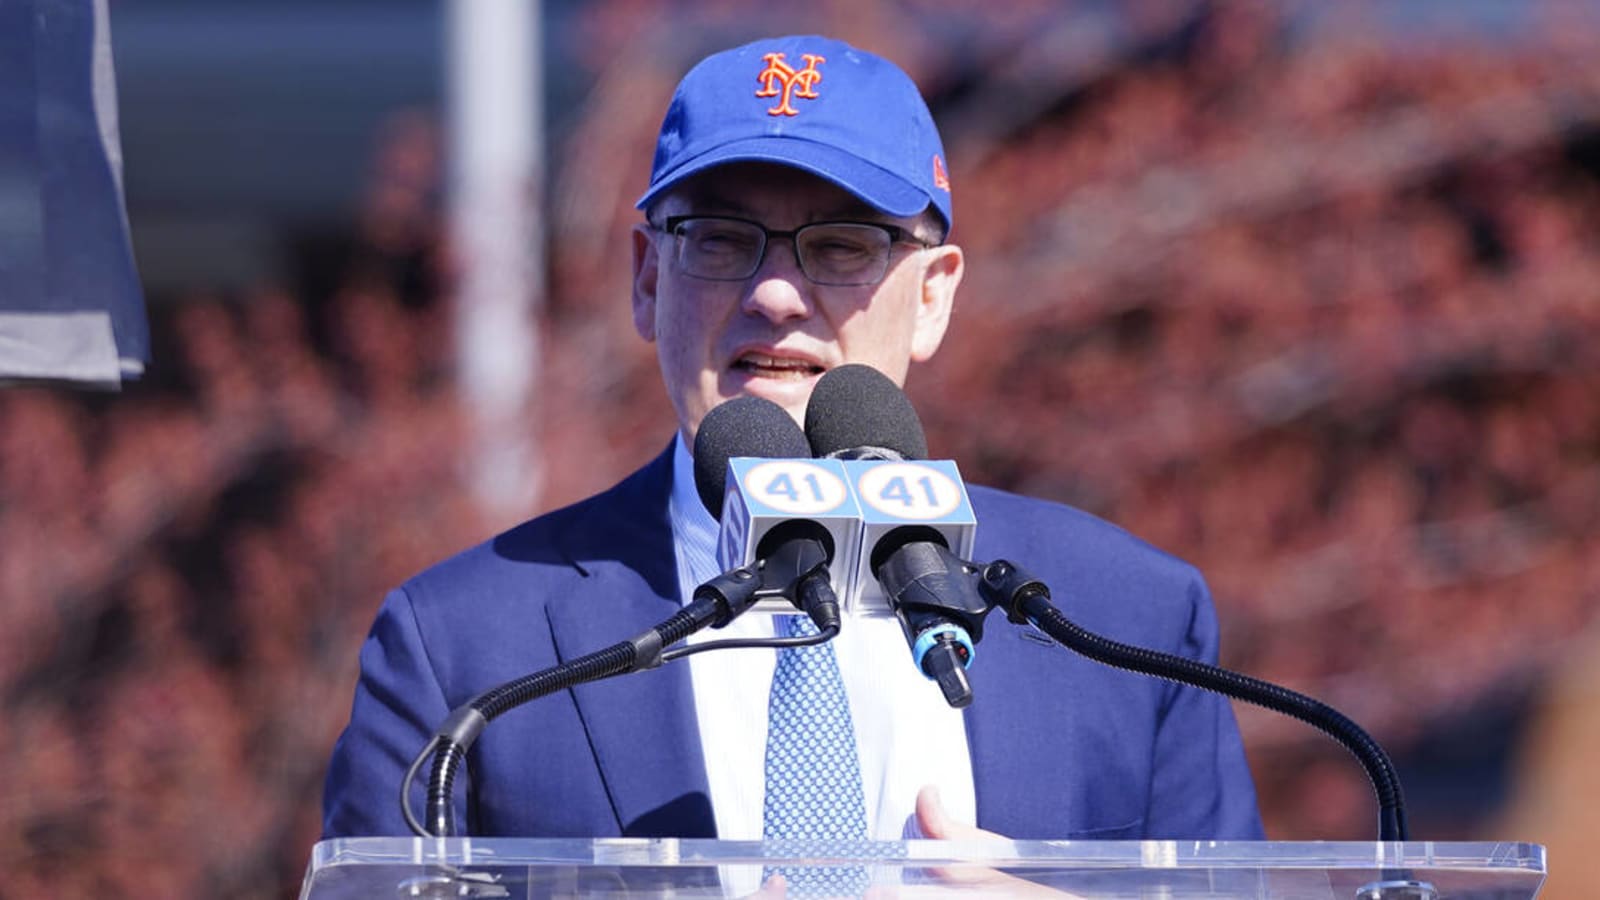 Mets owner: If $300M doesn't build good team, 'that's a problem'